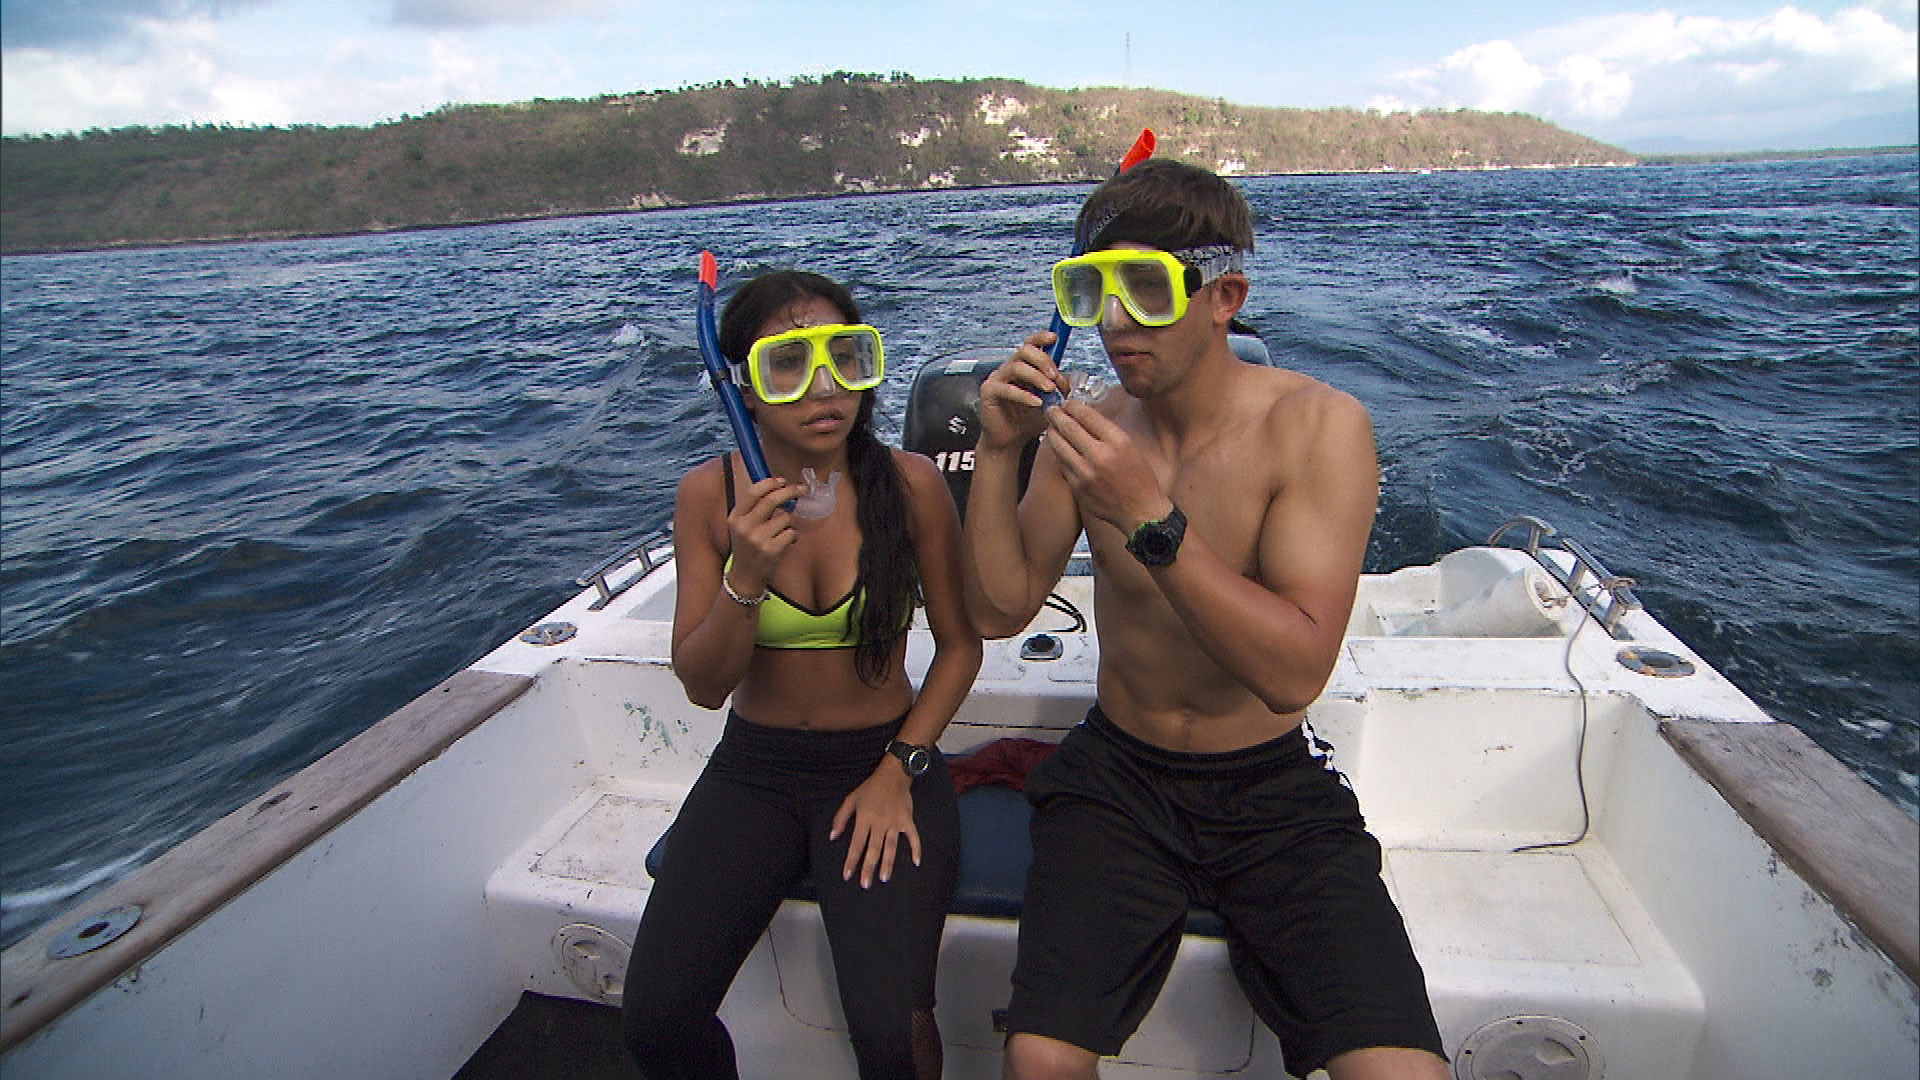 Dana and Matt strap into their snorkeling gear before searching for the next clue.